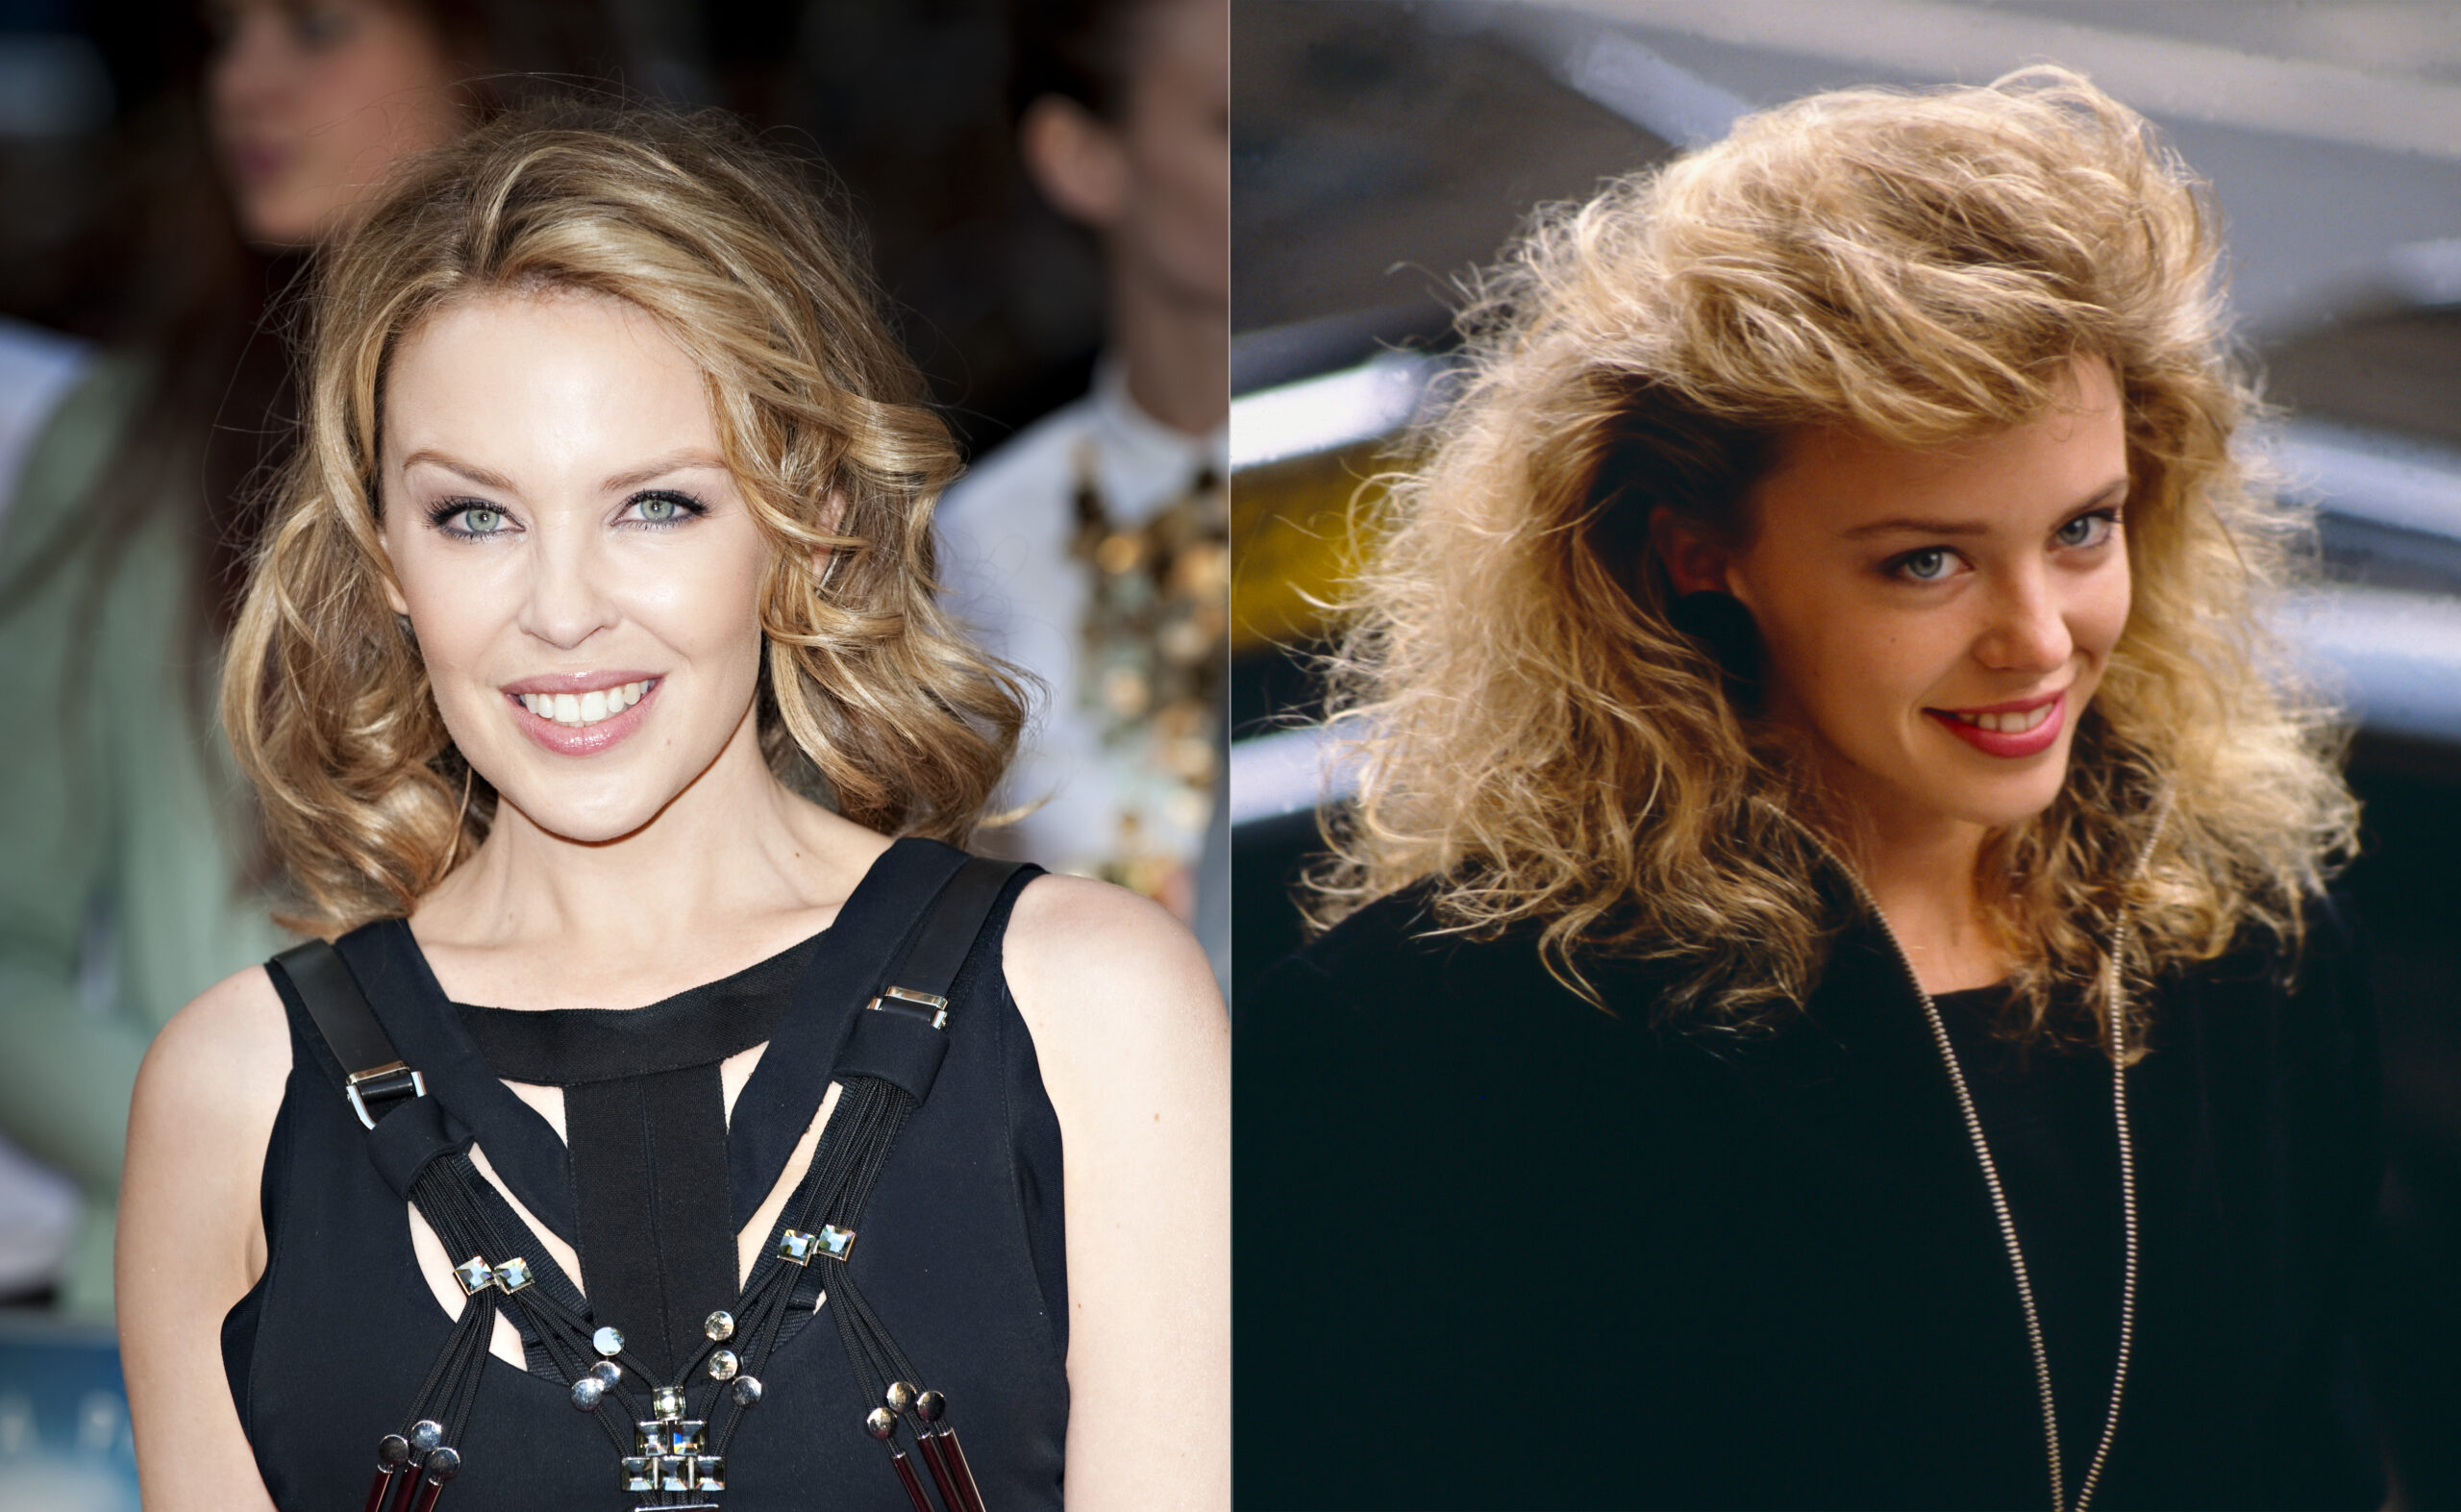 From curly 80s hair to modern day style queen: Kylie Minogue’s jaw-dropping beauty transformation will have you spinning around